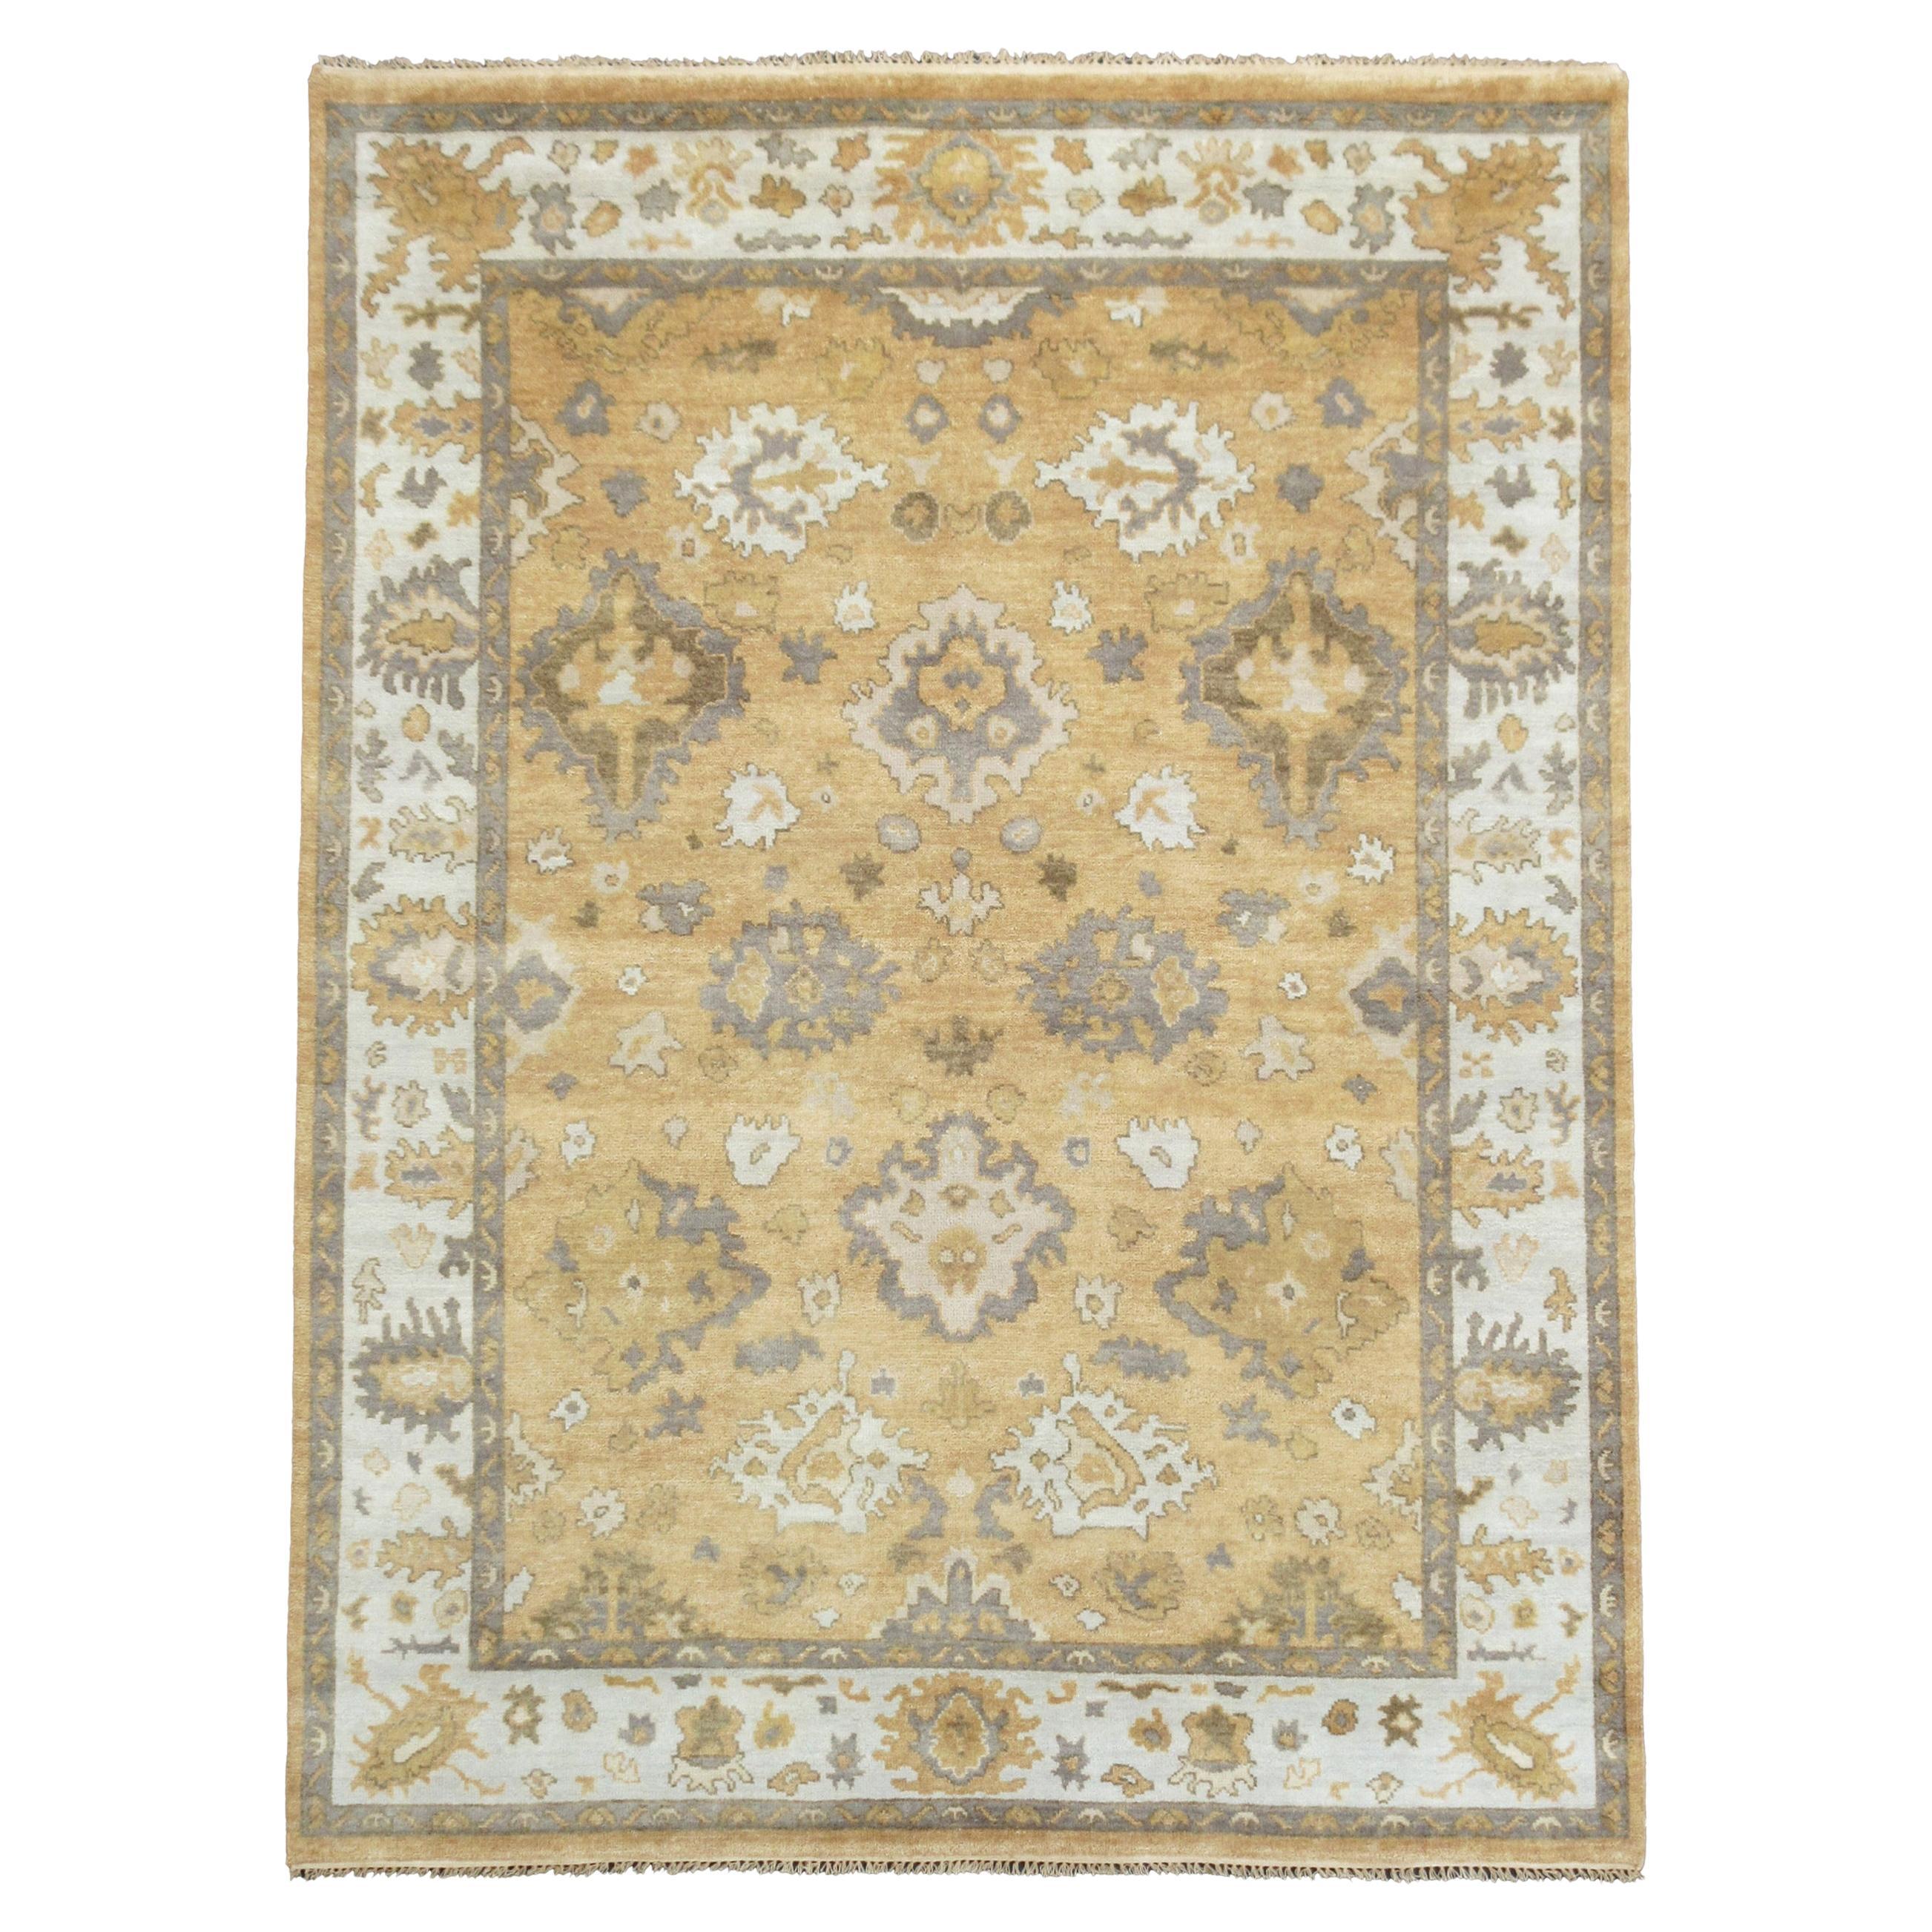 Apricot Oushak Area Rug For Sale